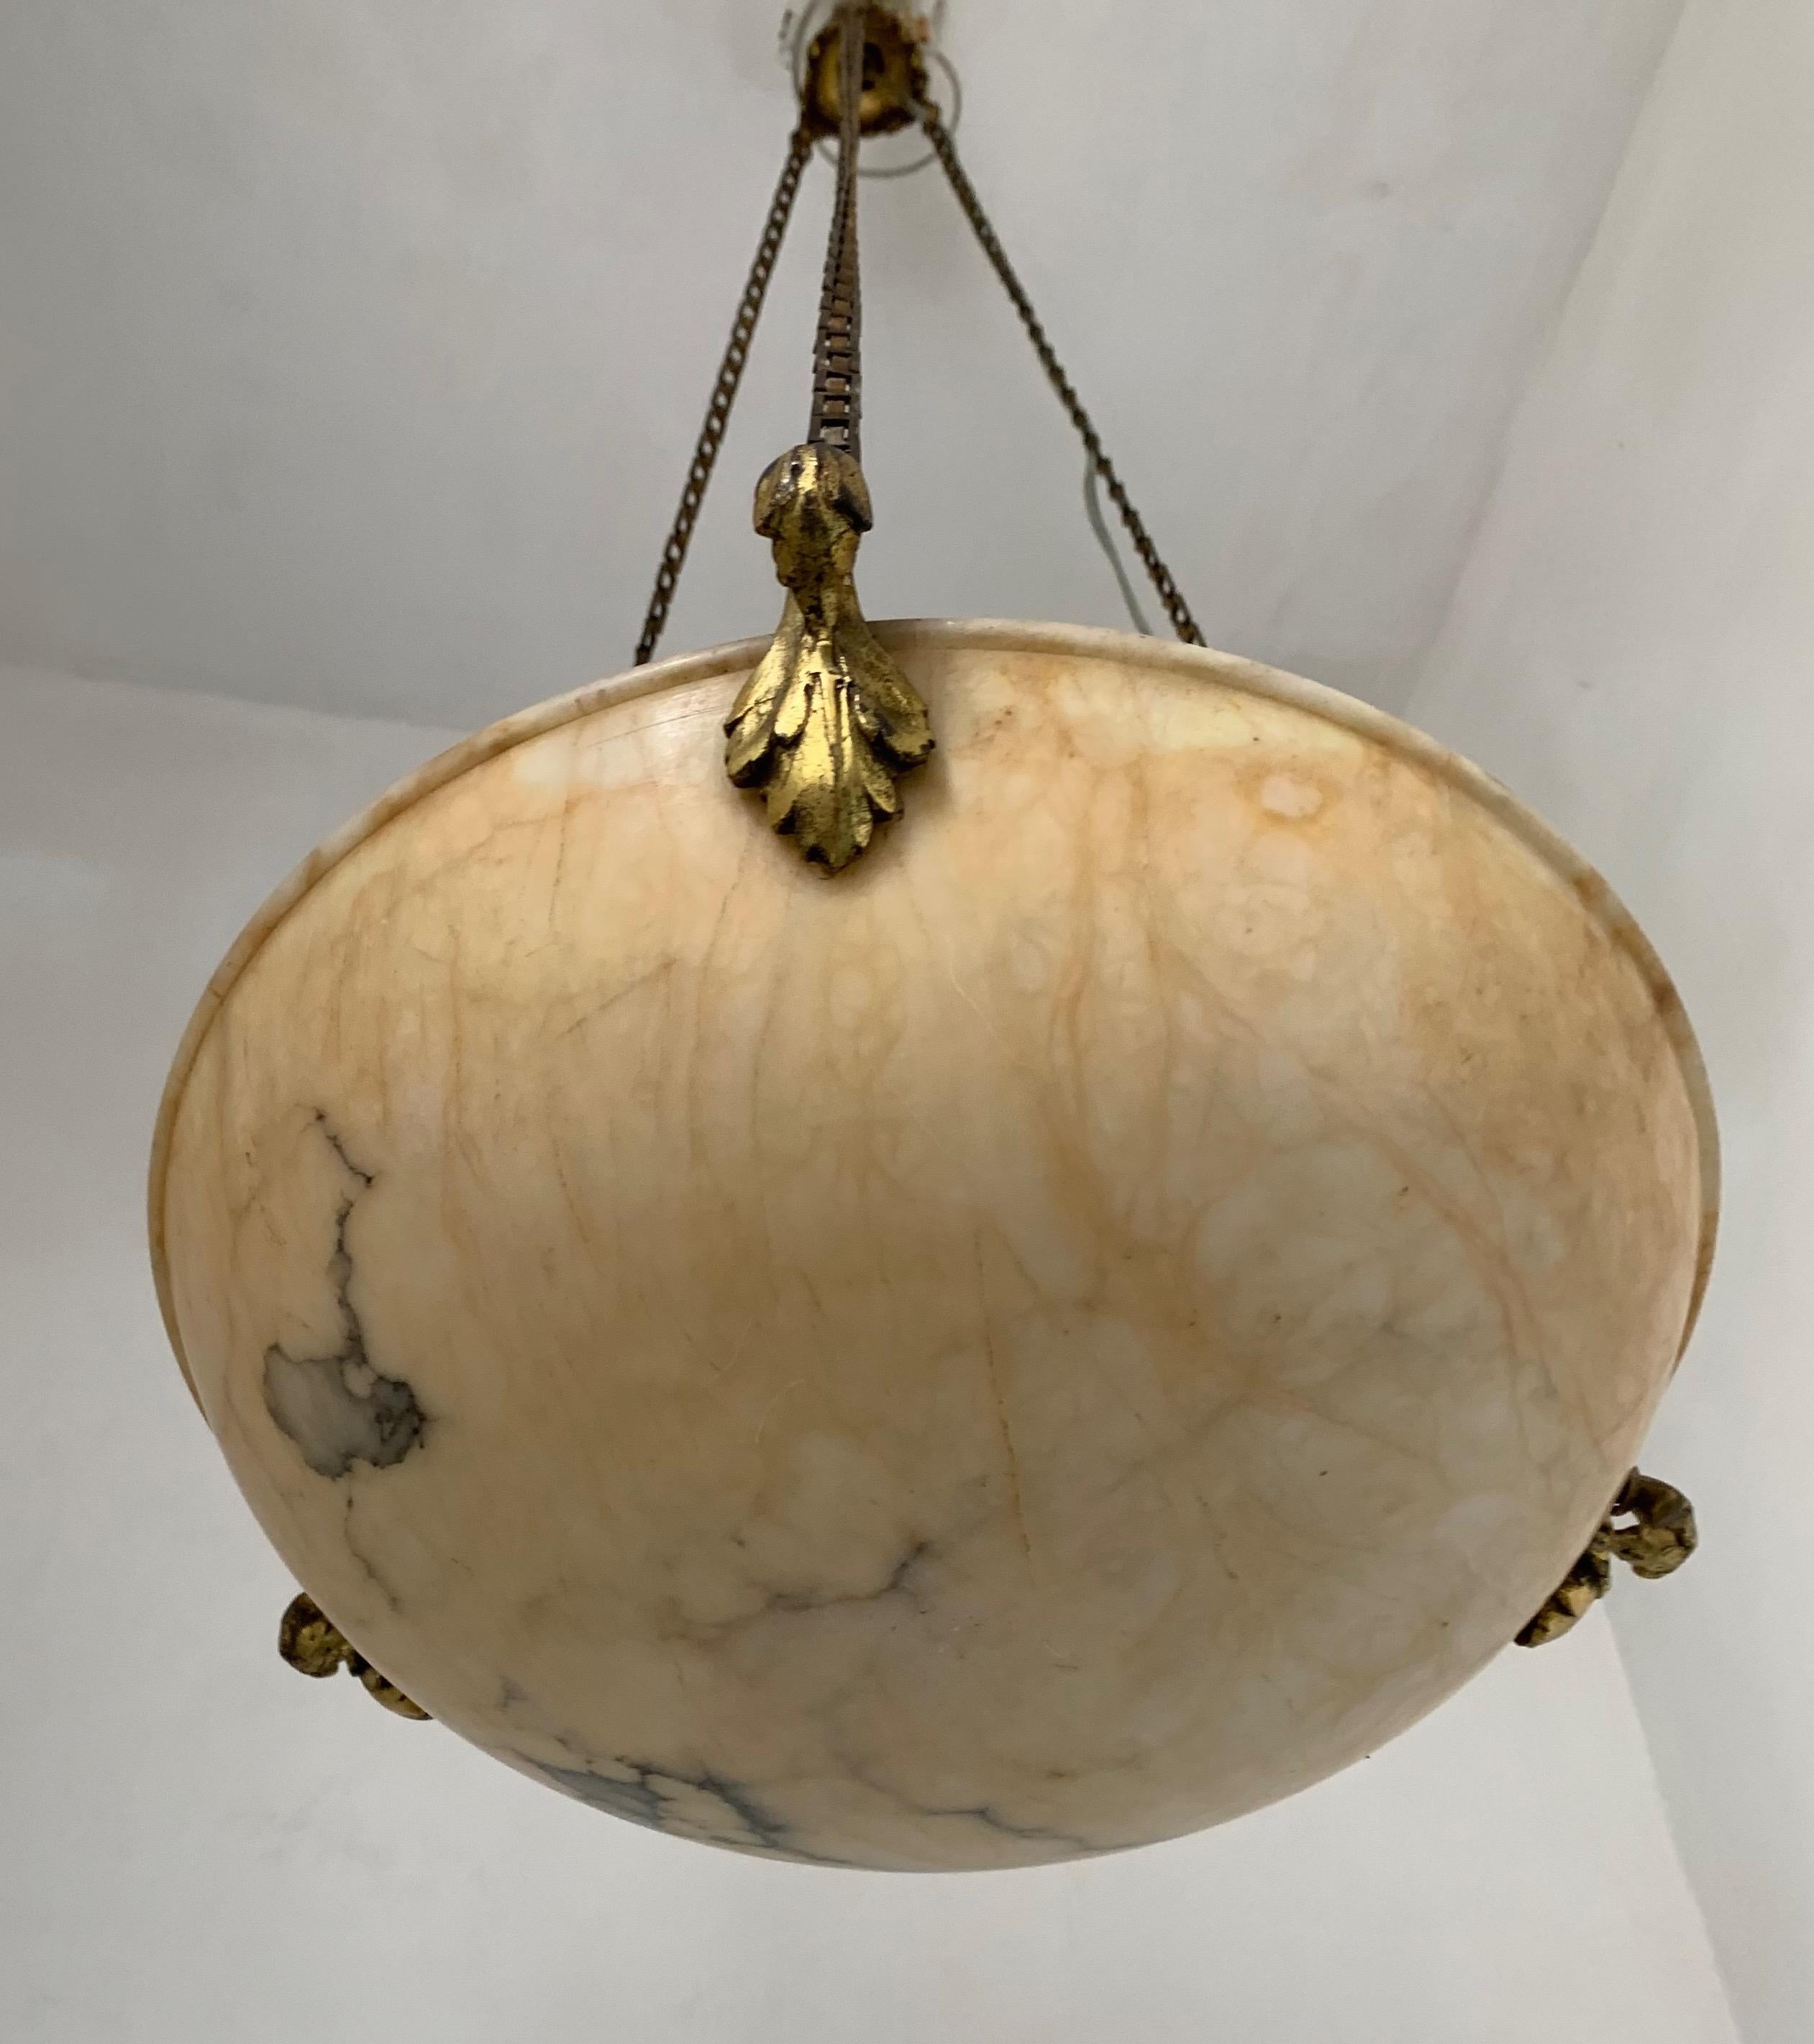 Great neoclassical design, rare color and excellent condition, French light fixture.

If you are looking for a stylish, timeless and small light to grace a small room in your living space then this antique alabaster fixture could be the one. All